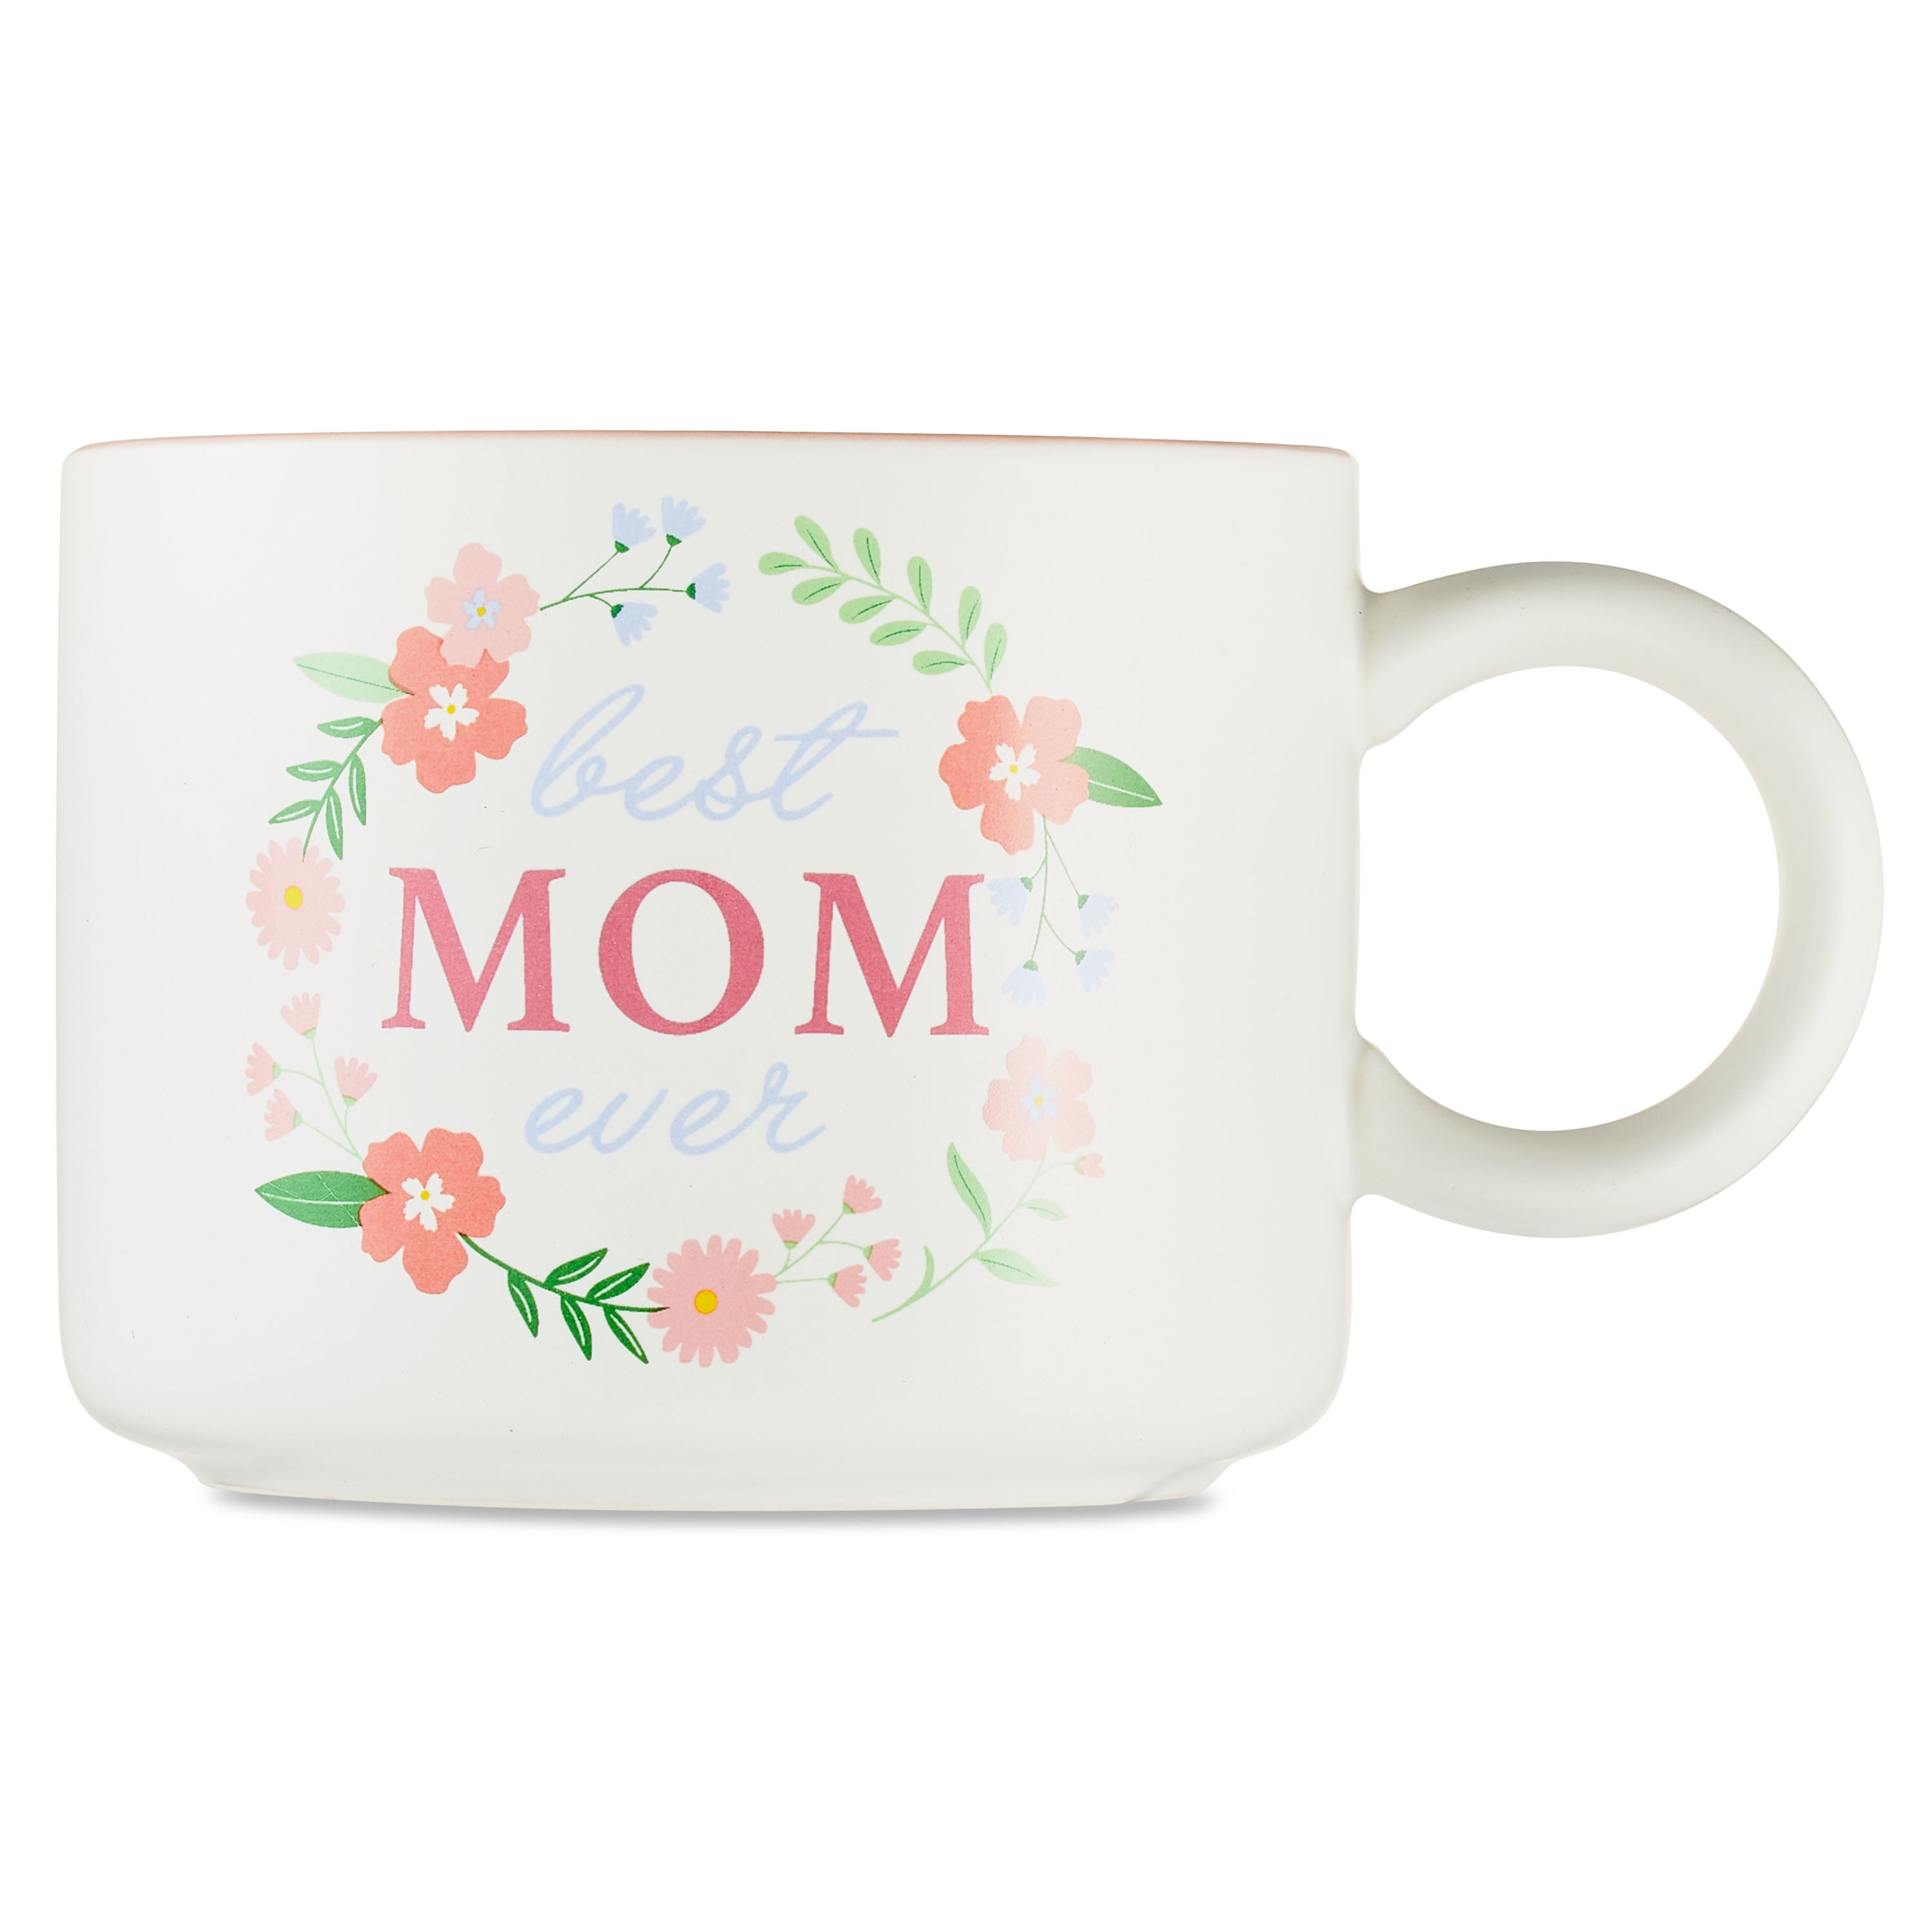 Best Mom Ever Coffee Mug, Mother's Day Gifts for Mom by Daughter Son, 14OZ  (400 ml) Pink Marble Text…See more Best Mom Ever Coffee Mug, Mother's Day